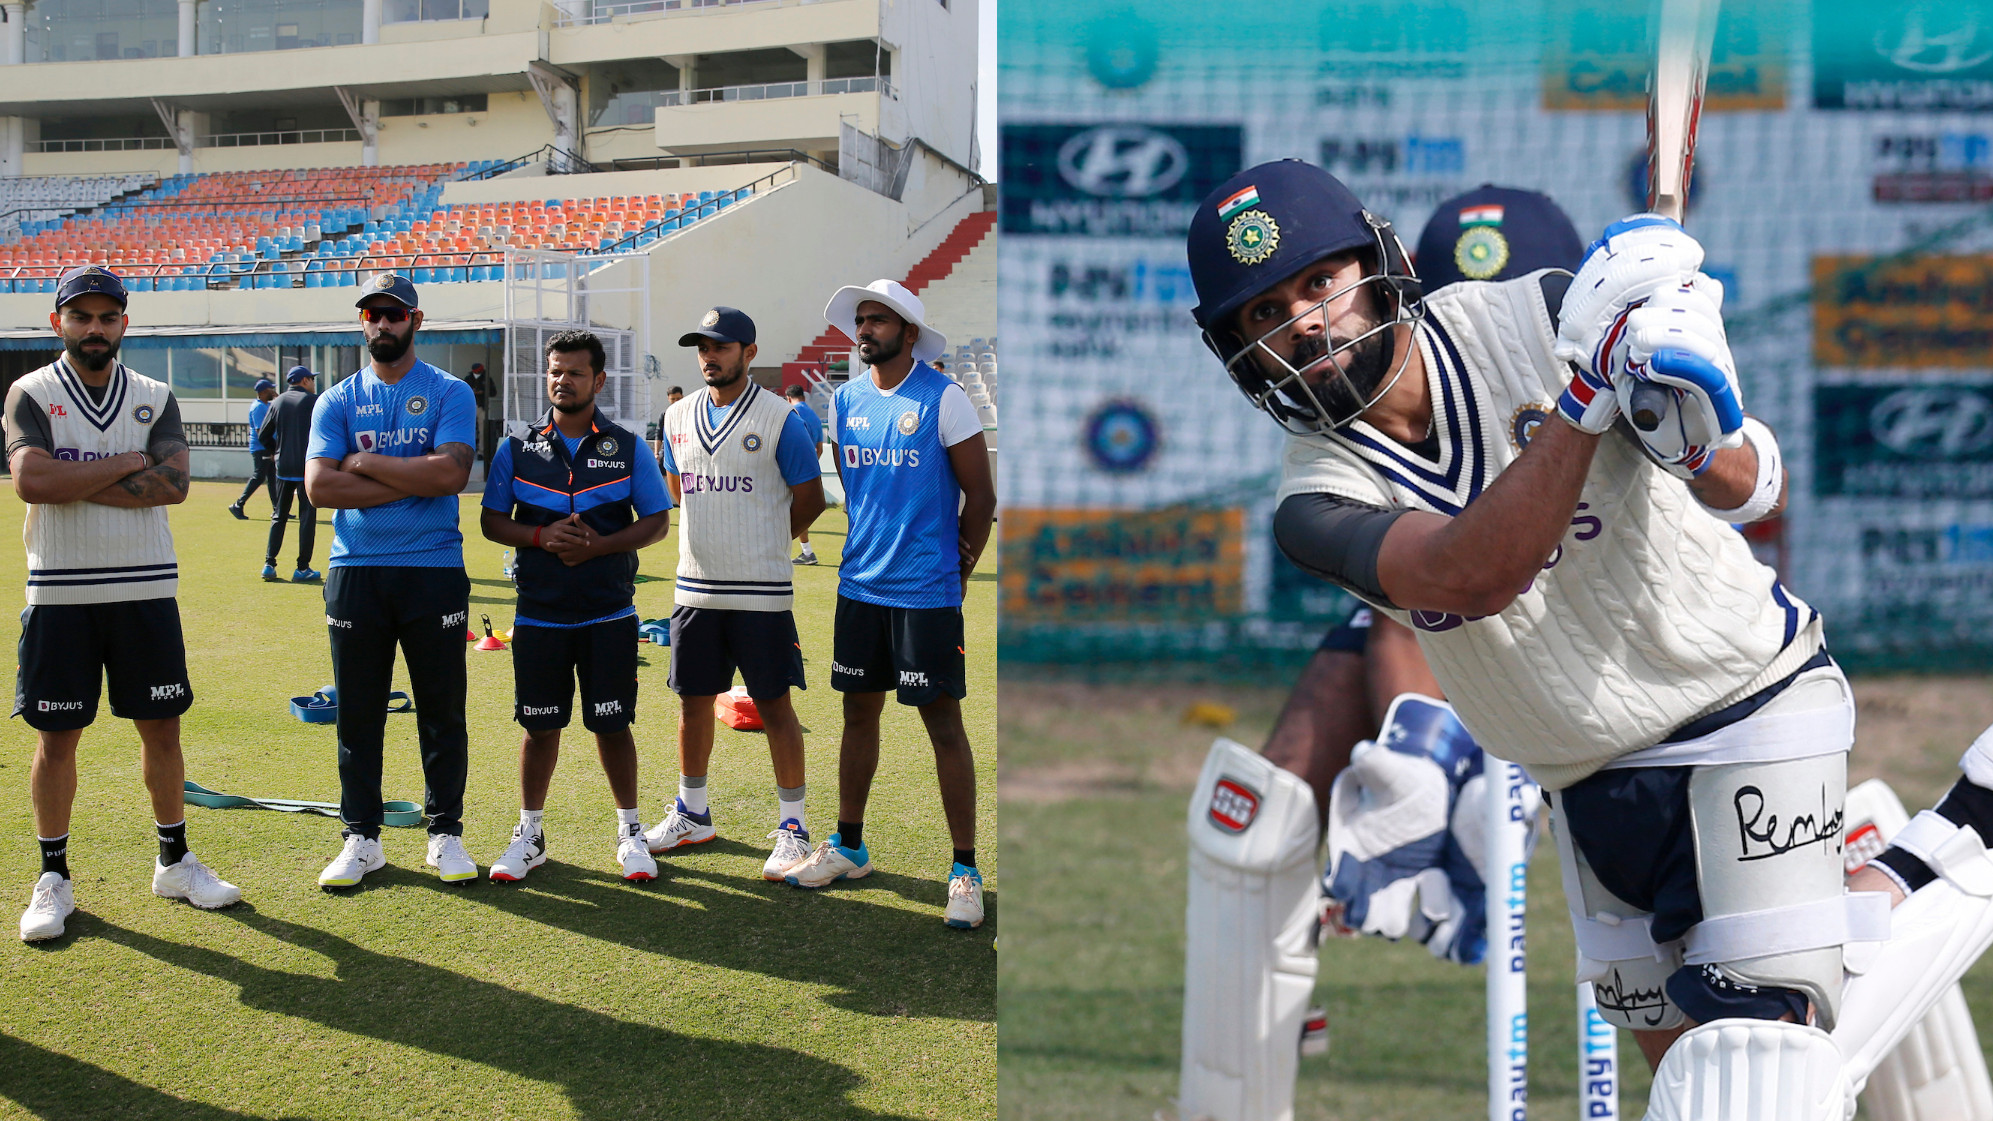 IND v SL 2022: BCCI shares photos from Team India’s practice session in Mohali ahead of 1st Test